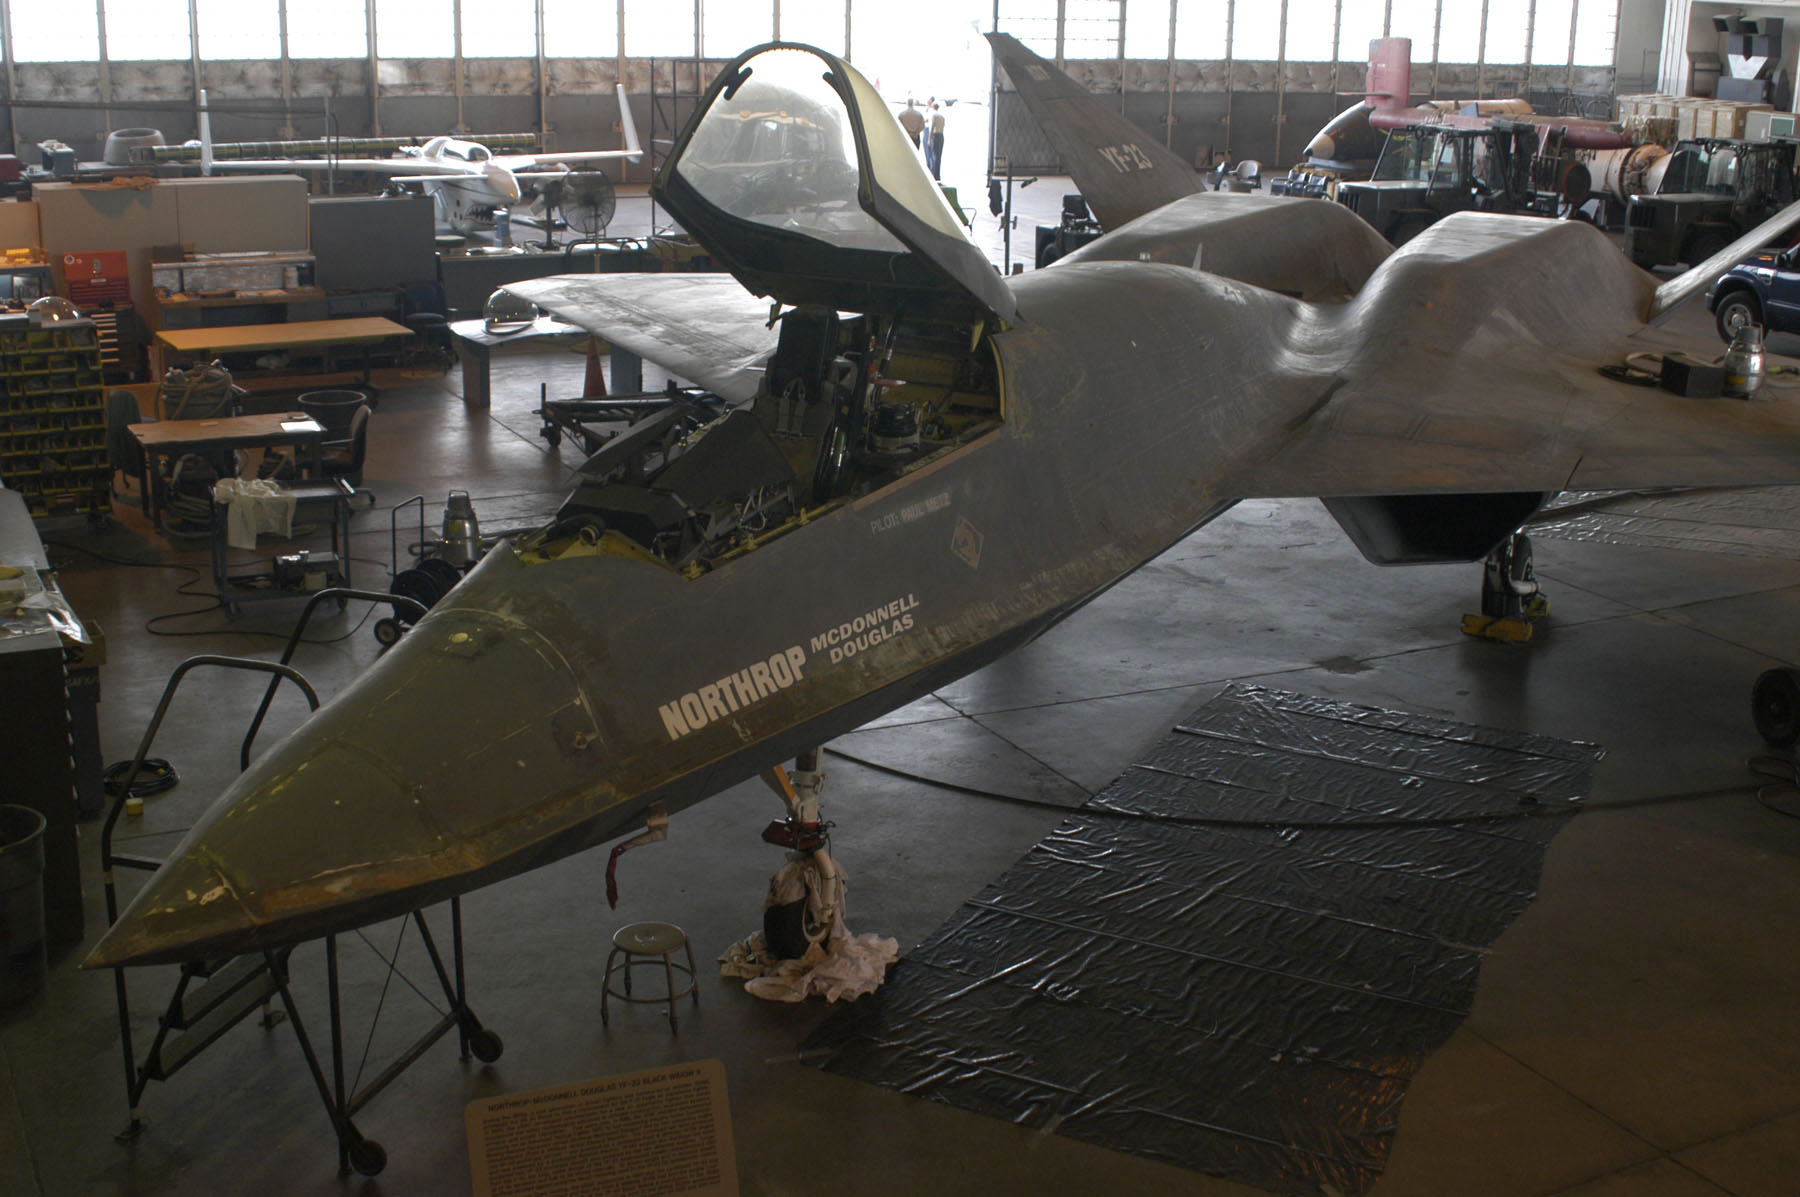 YF-23_in_the_restoration_area_of_the_usaf_museum.jpg